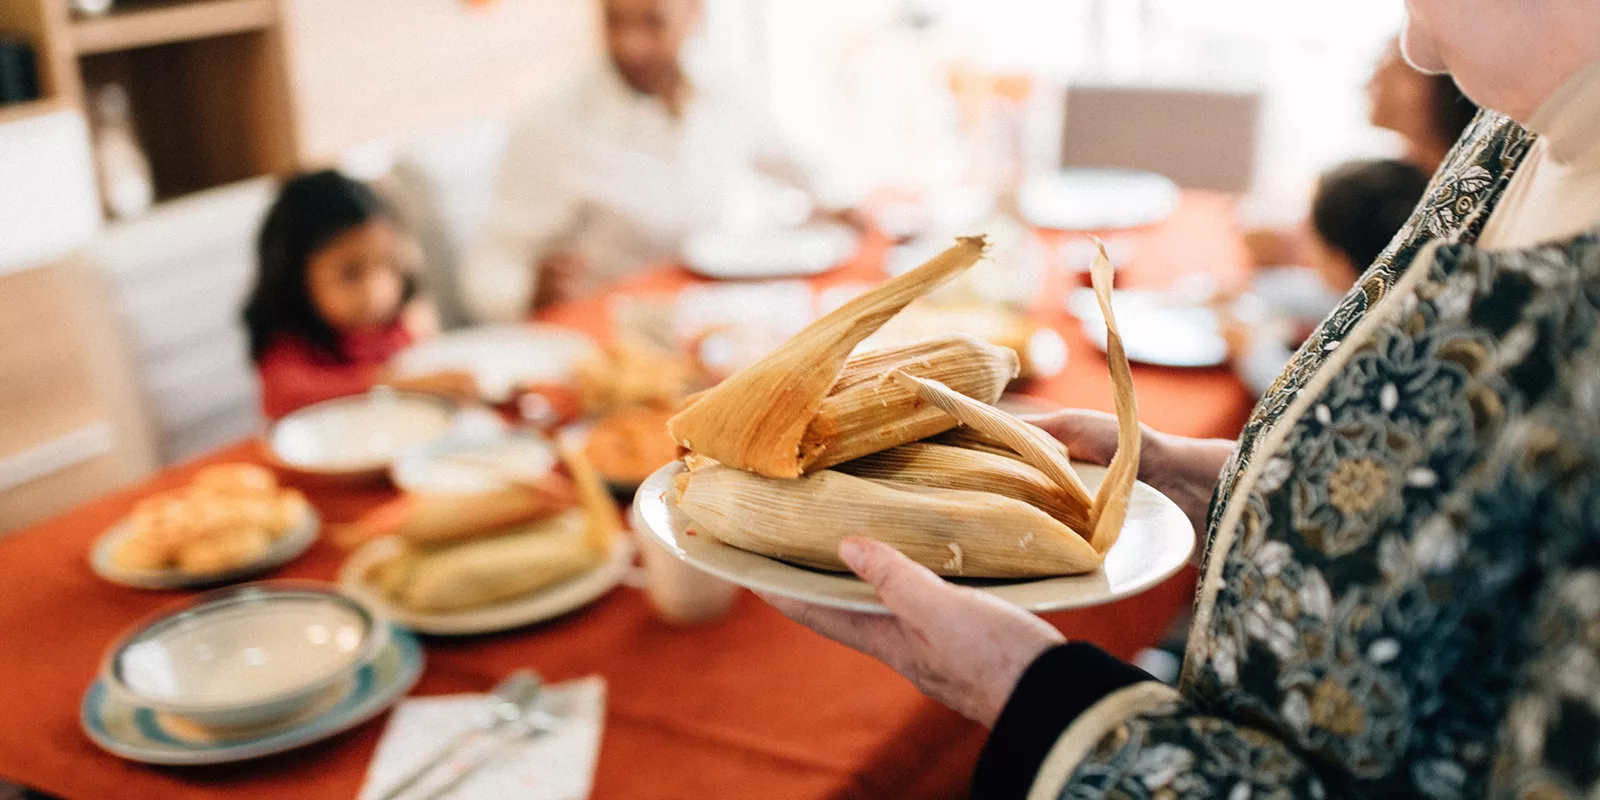 A plate of tamales is seen in focus with a table in the background laid with food and people sitting around it.